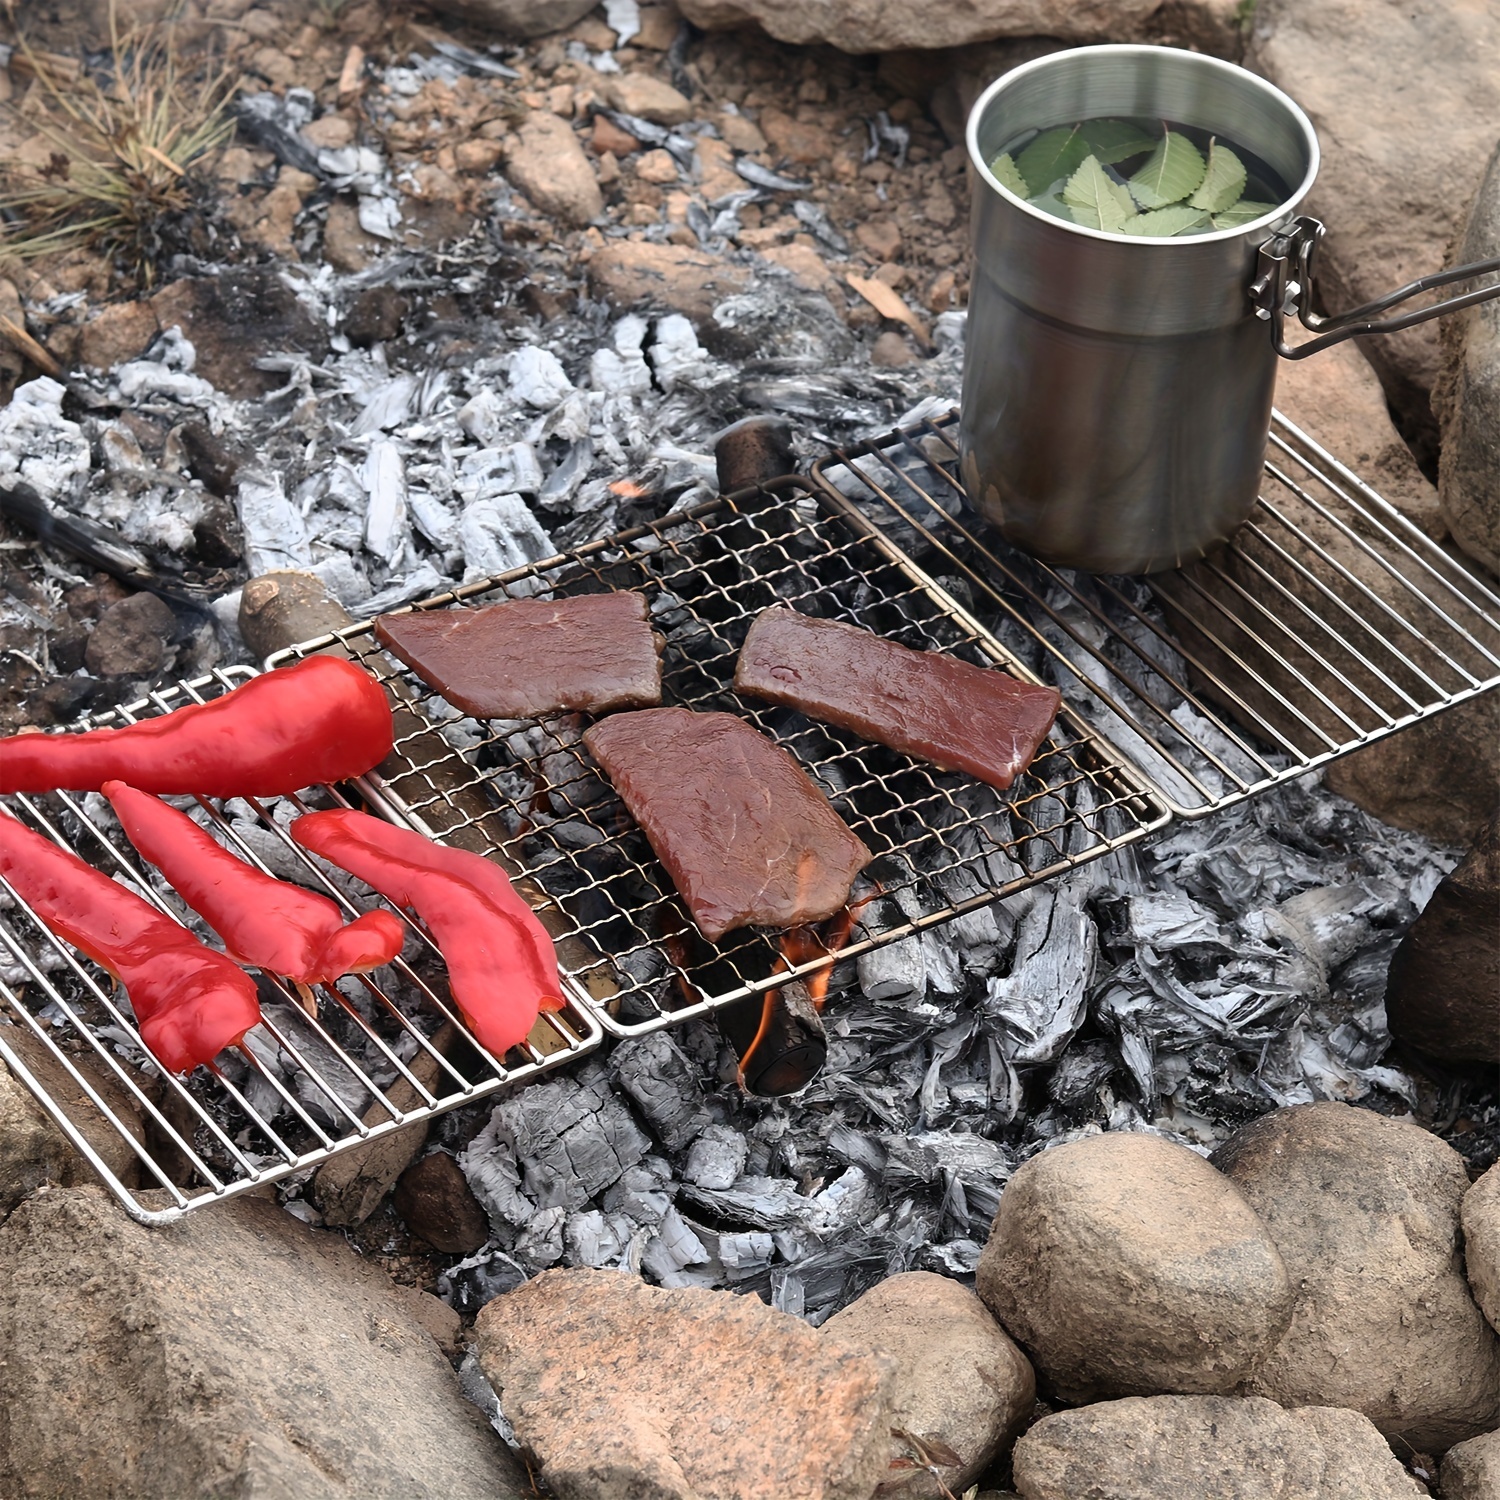 Multifunctional Folding Campfire Grill, Portable Stainless Steel